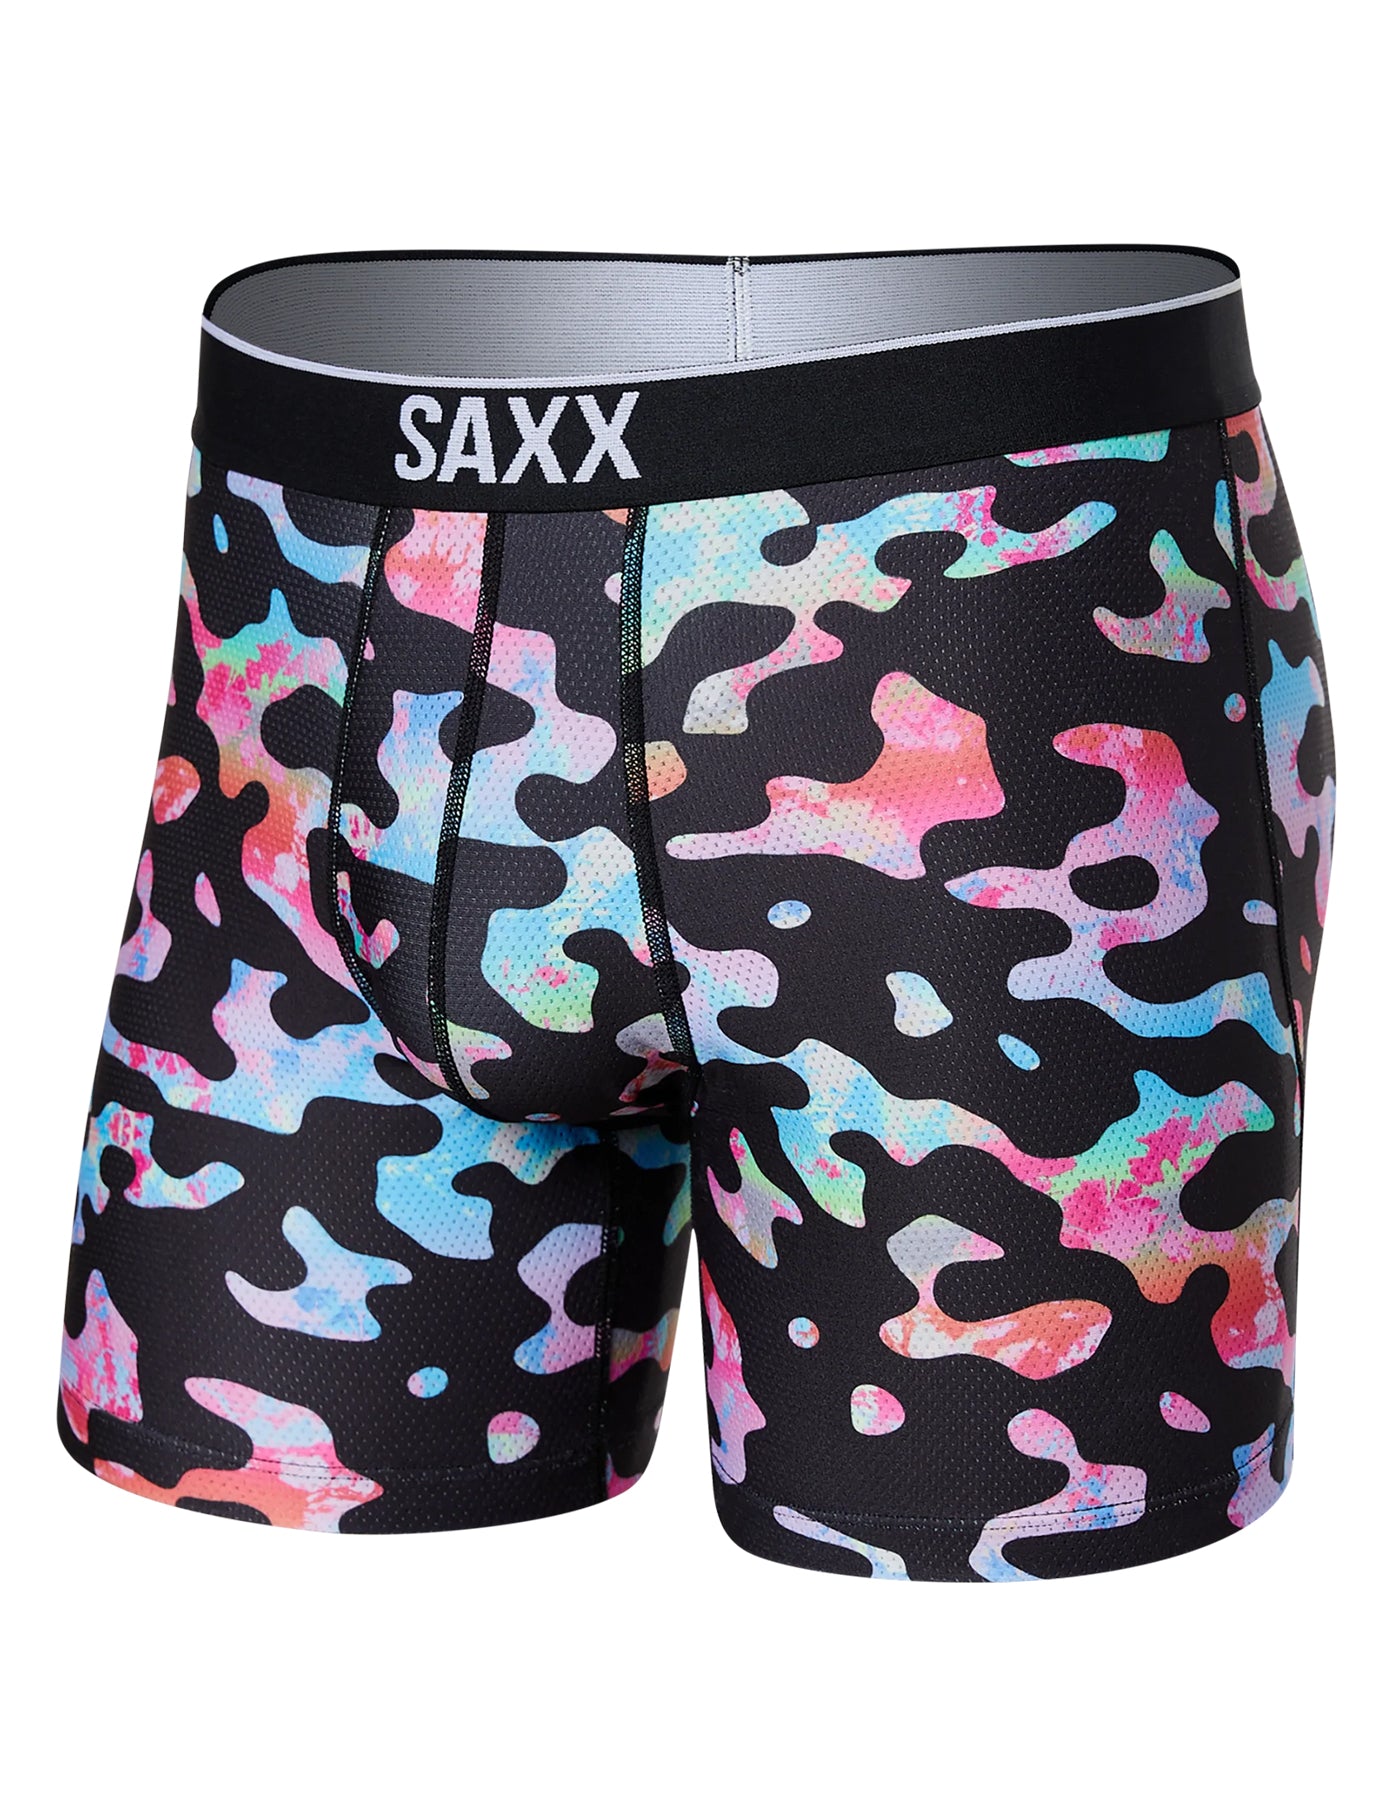 Saxx Volt Breathable Mesh Washed Out Camo Multi Boxer